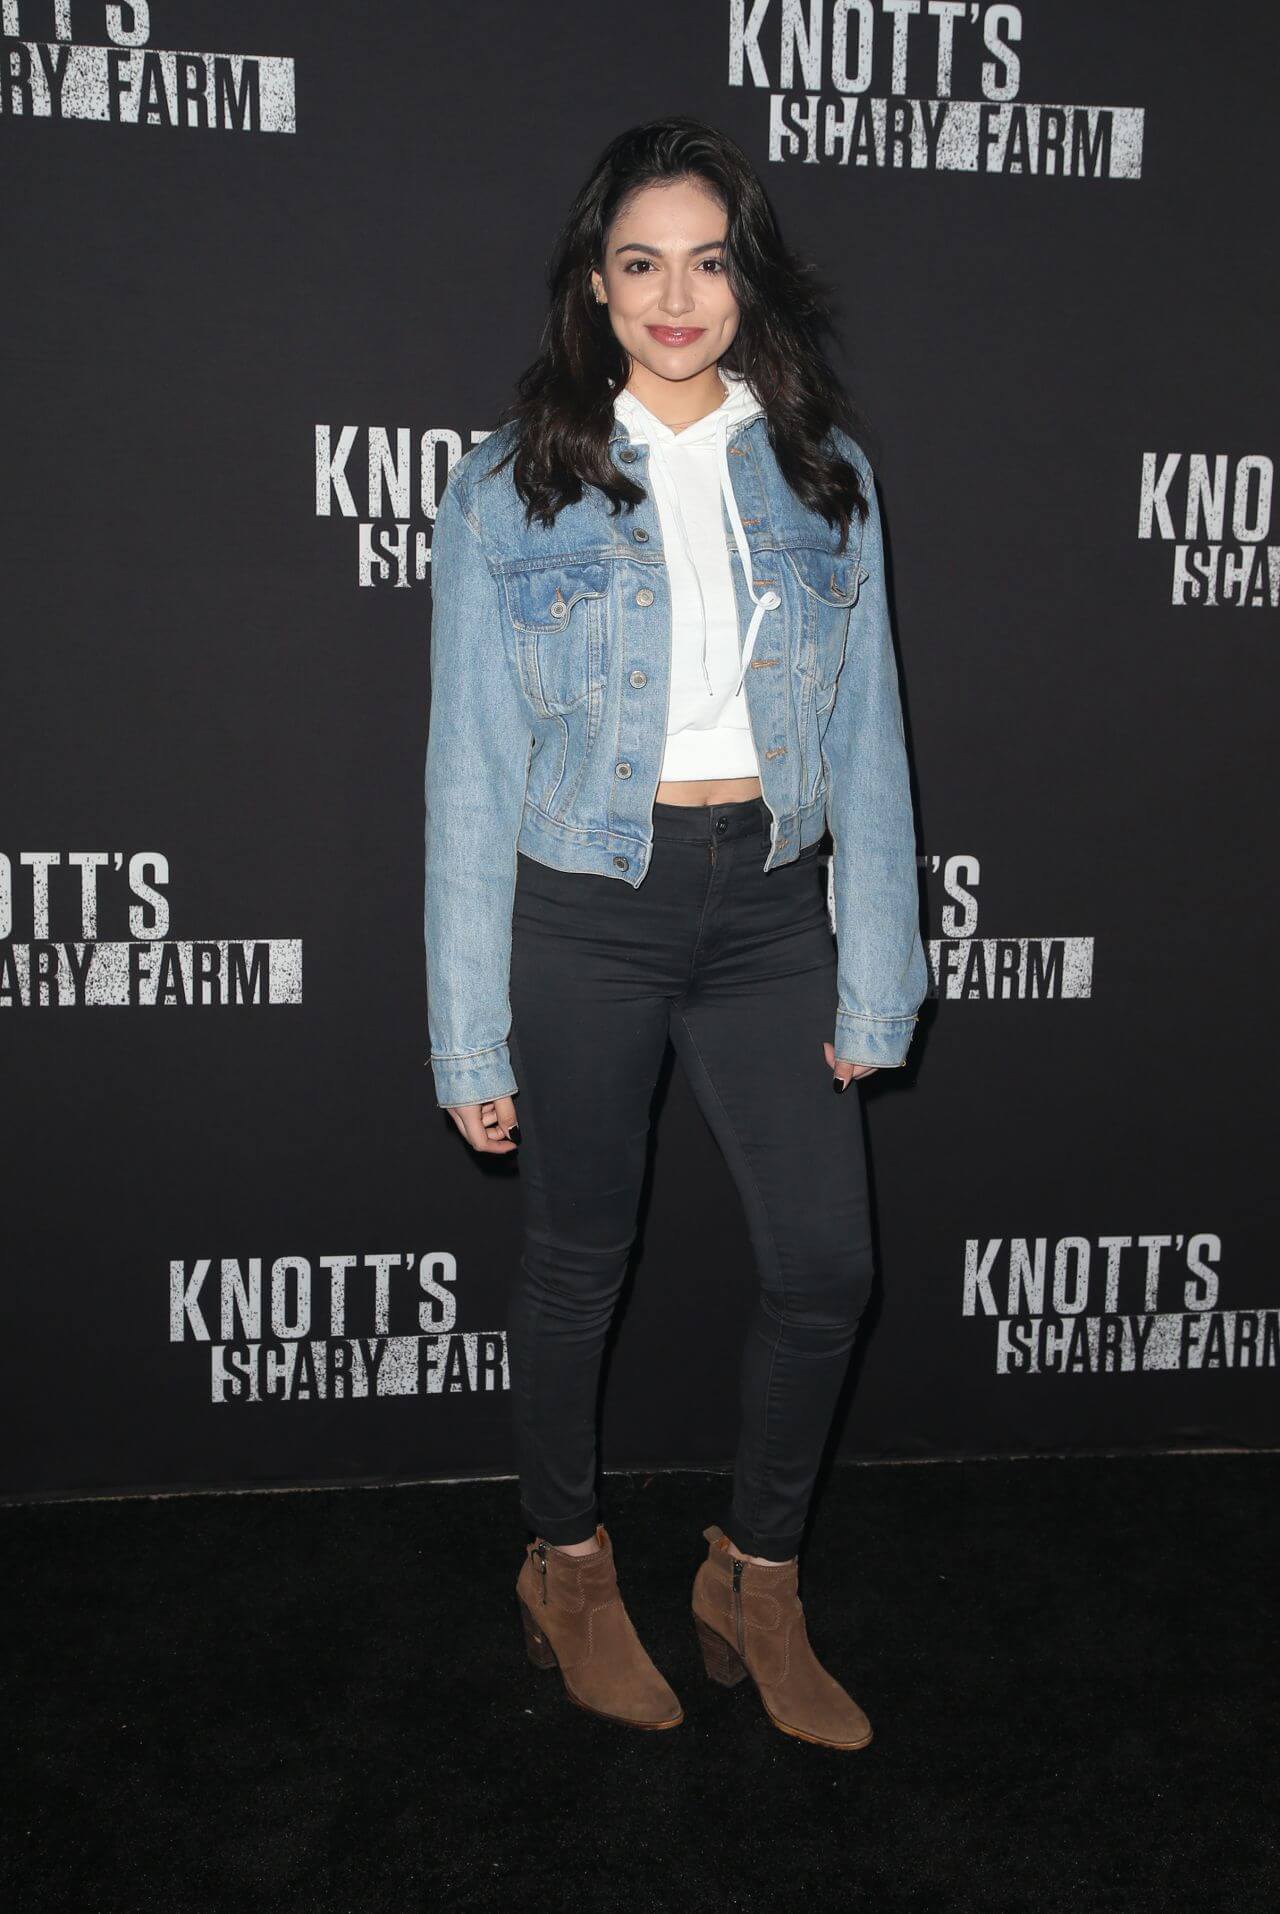 Bethany Mota In Blue Denim Jacket Under White Top With Black Jeans At Knott’s Scary Farm Celebrity Night in Buena Park